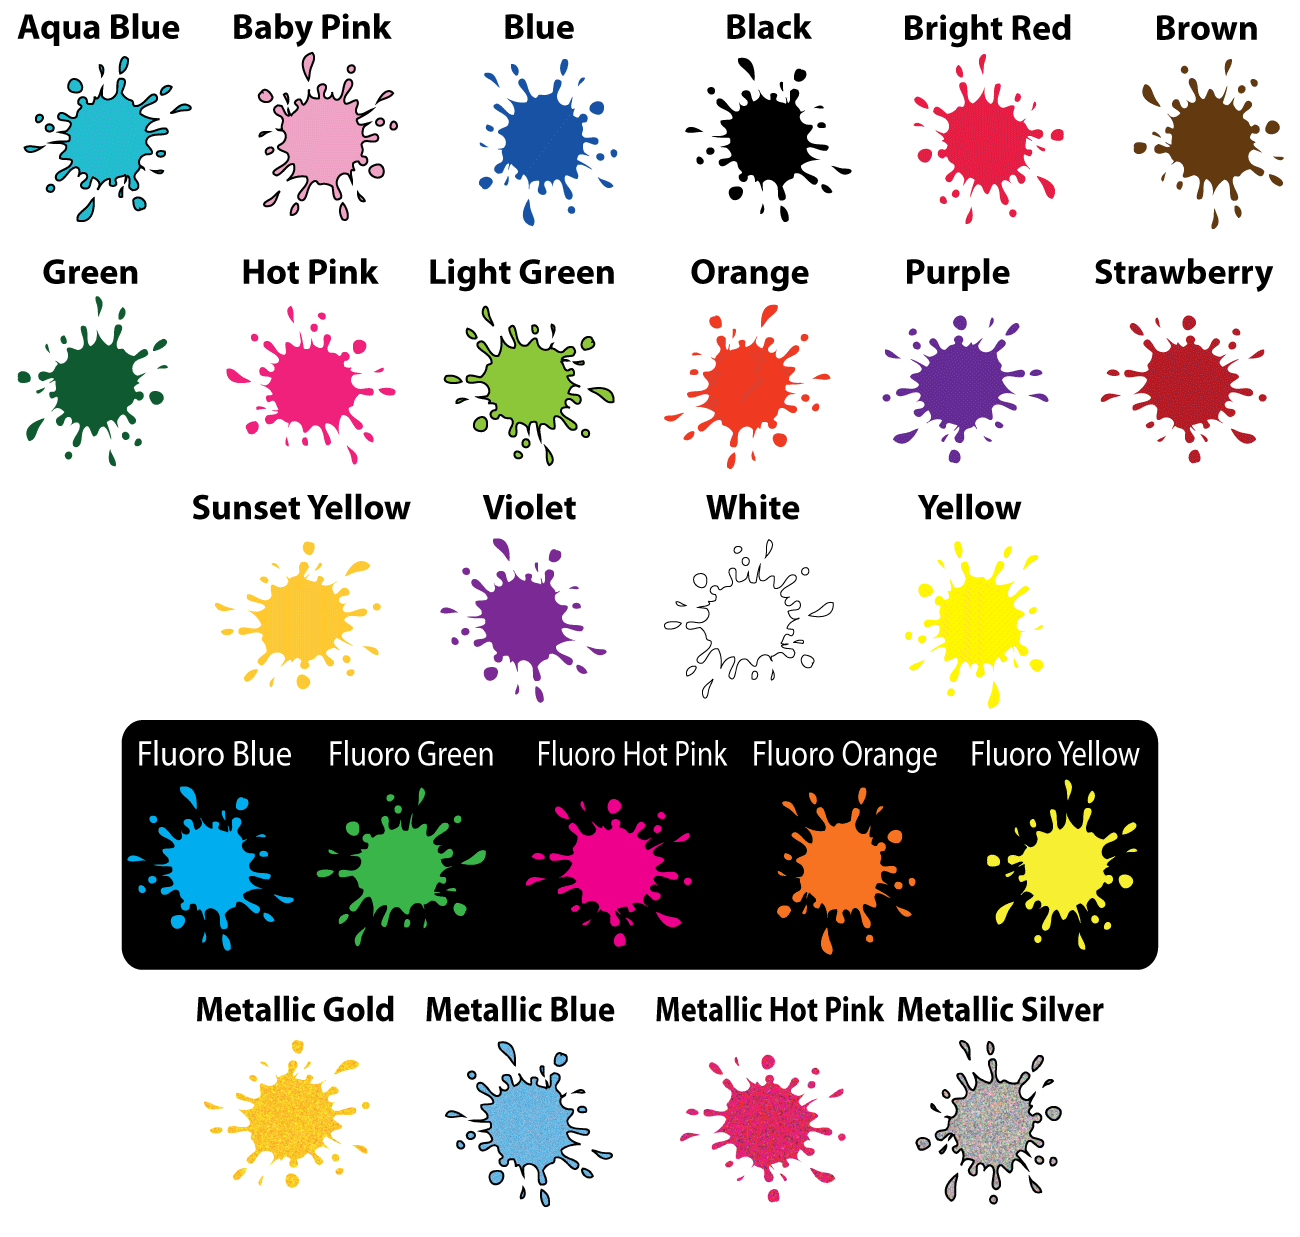 Starbright Inks - Glowing Neon Set Tattoo Inks | Top-Rated Tattoo Ink –  starbrite colors